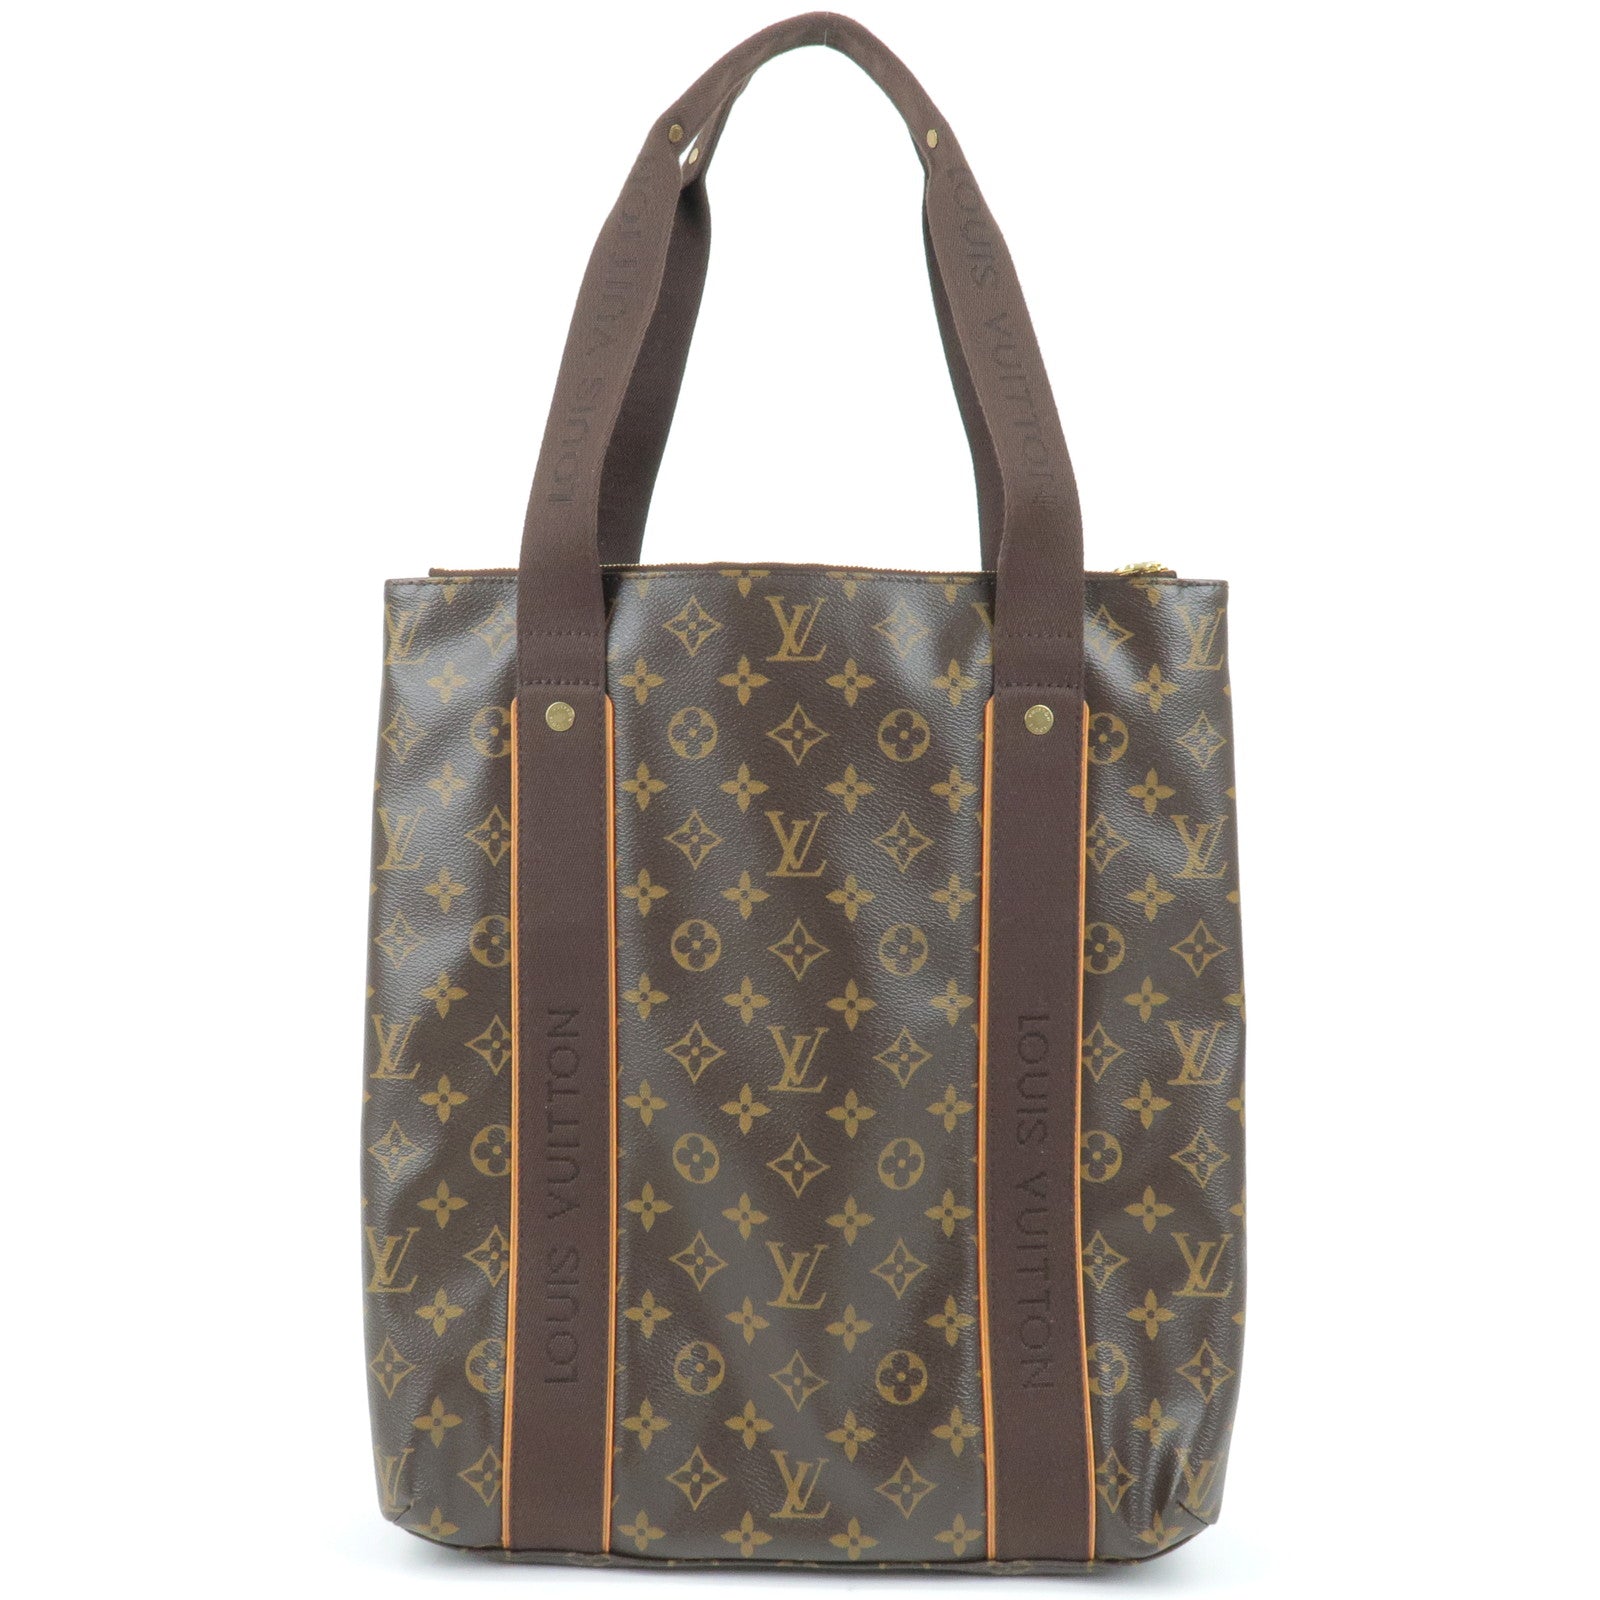 2017 pre-owned Chapman Brothers tote bag